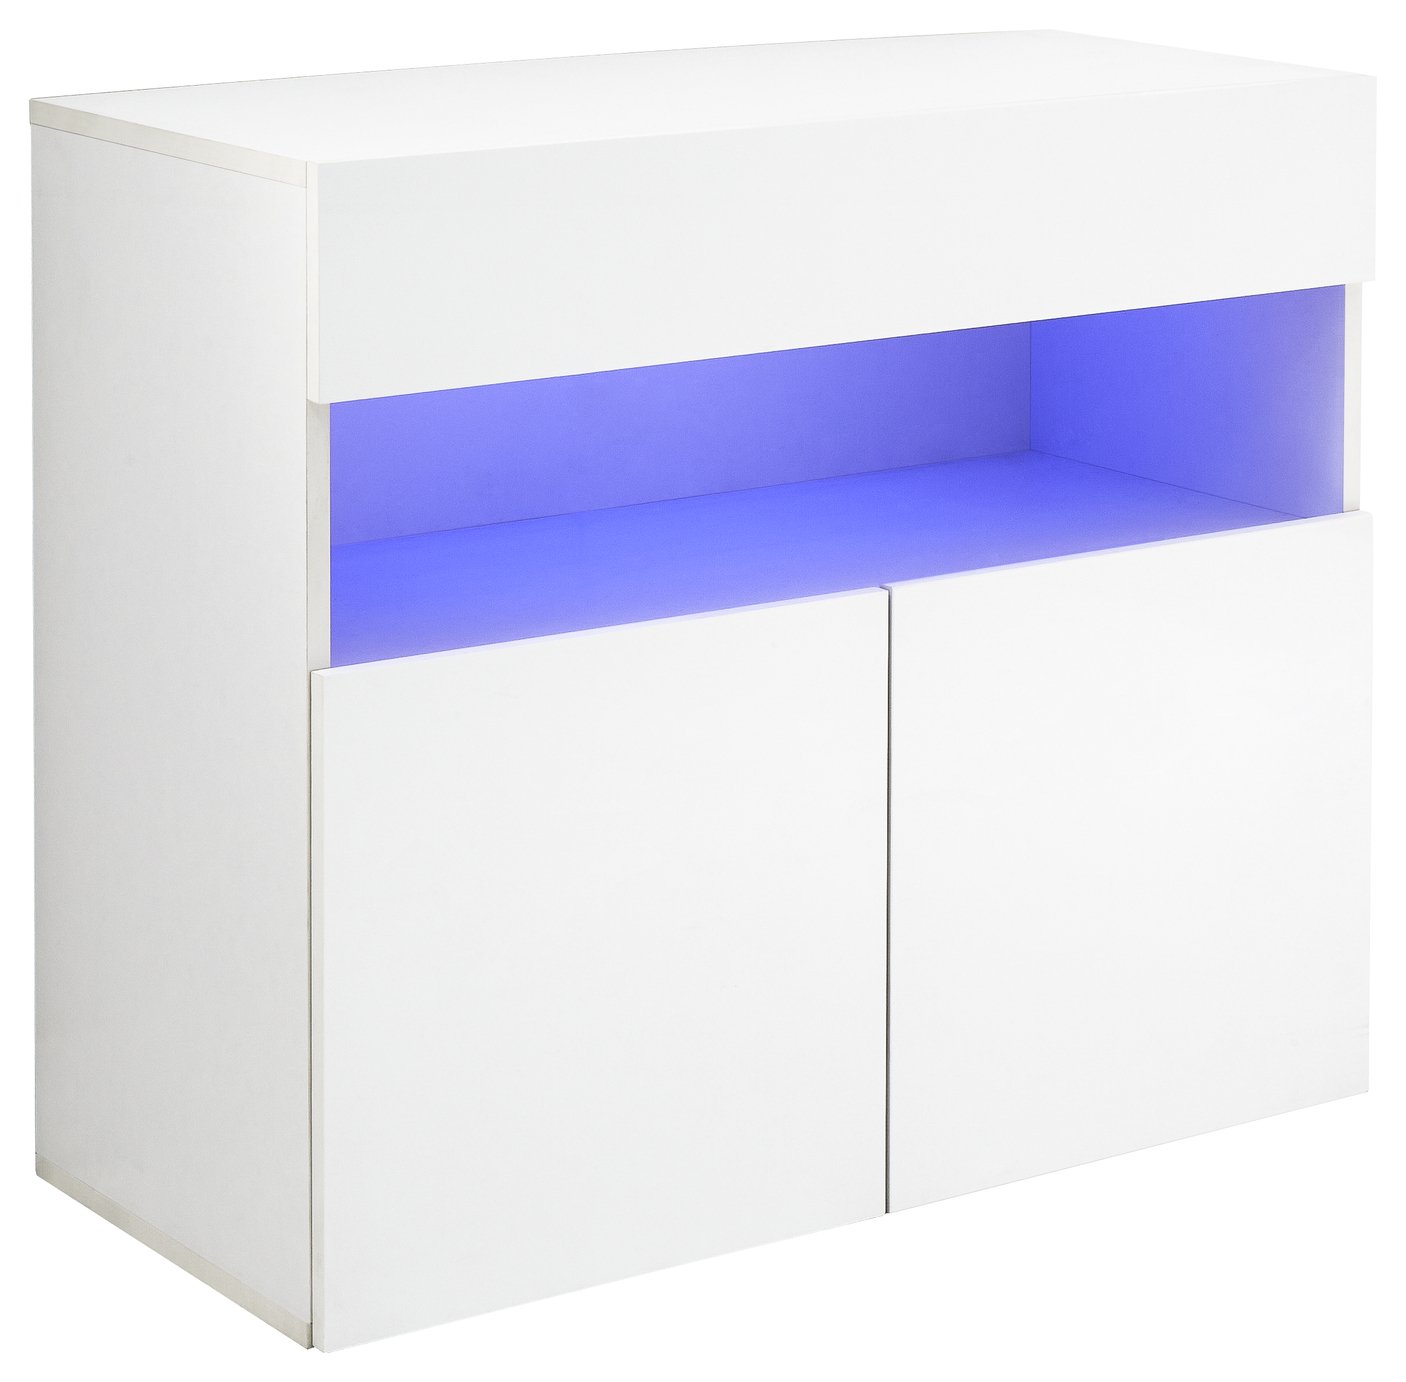 GFW Galicia 3 Door Wall Mounted LED Sideboard - White